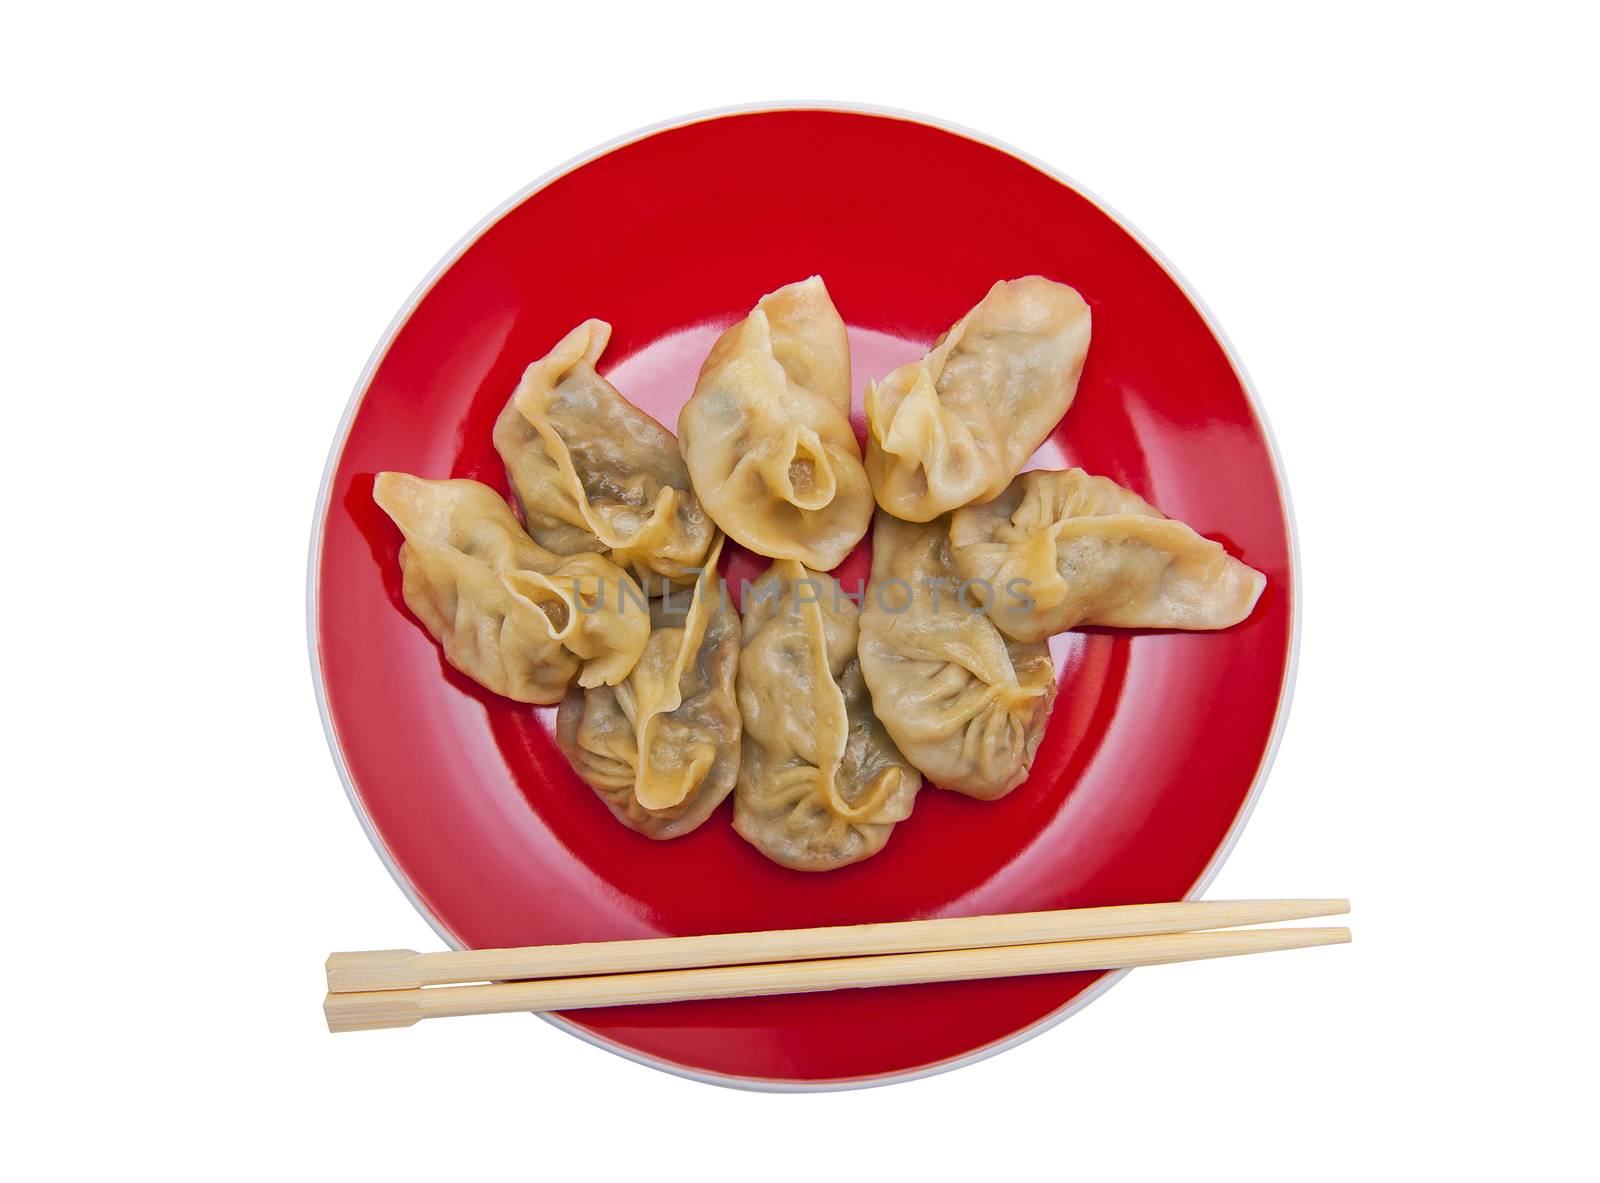 Dumplings on the red plate isolated on the white background